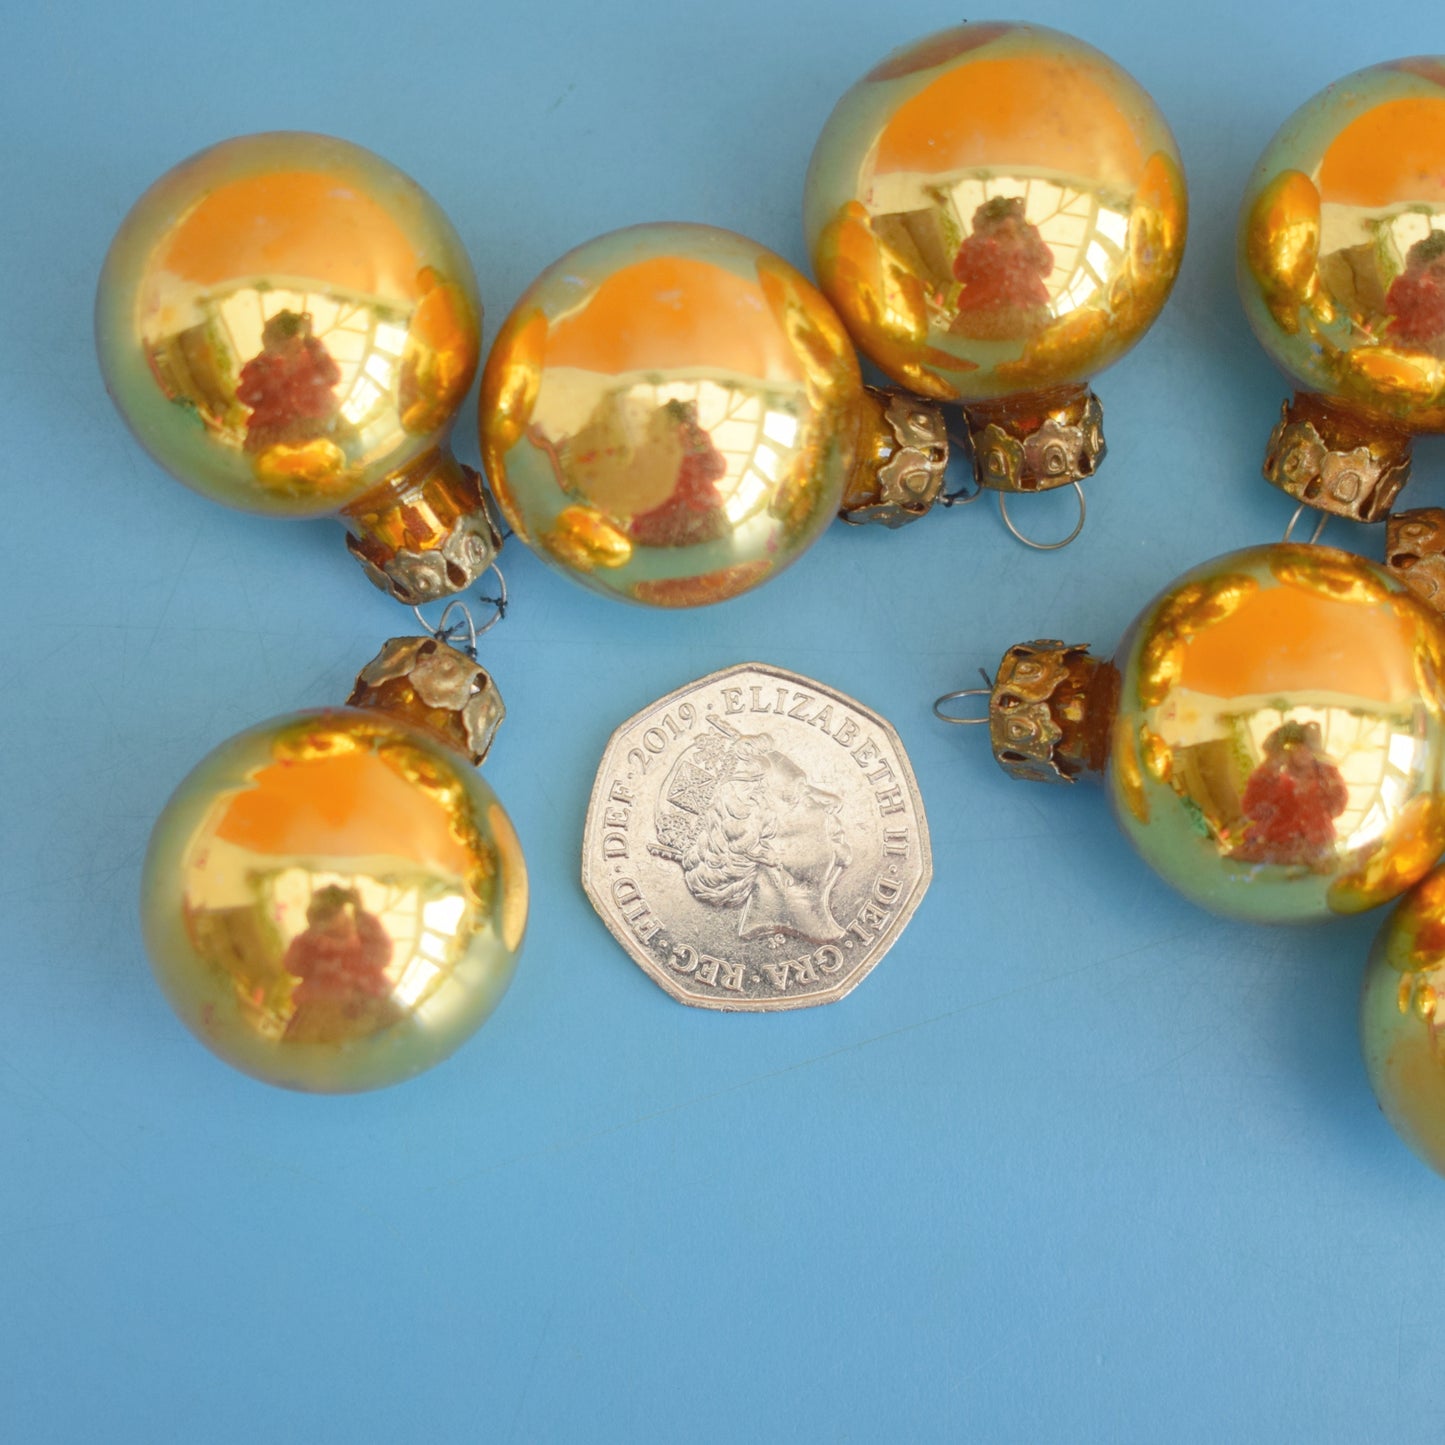 Vintage 1970s Glass Christmas Baubles - Small 8